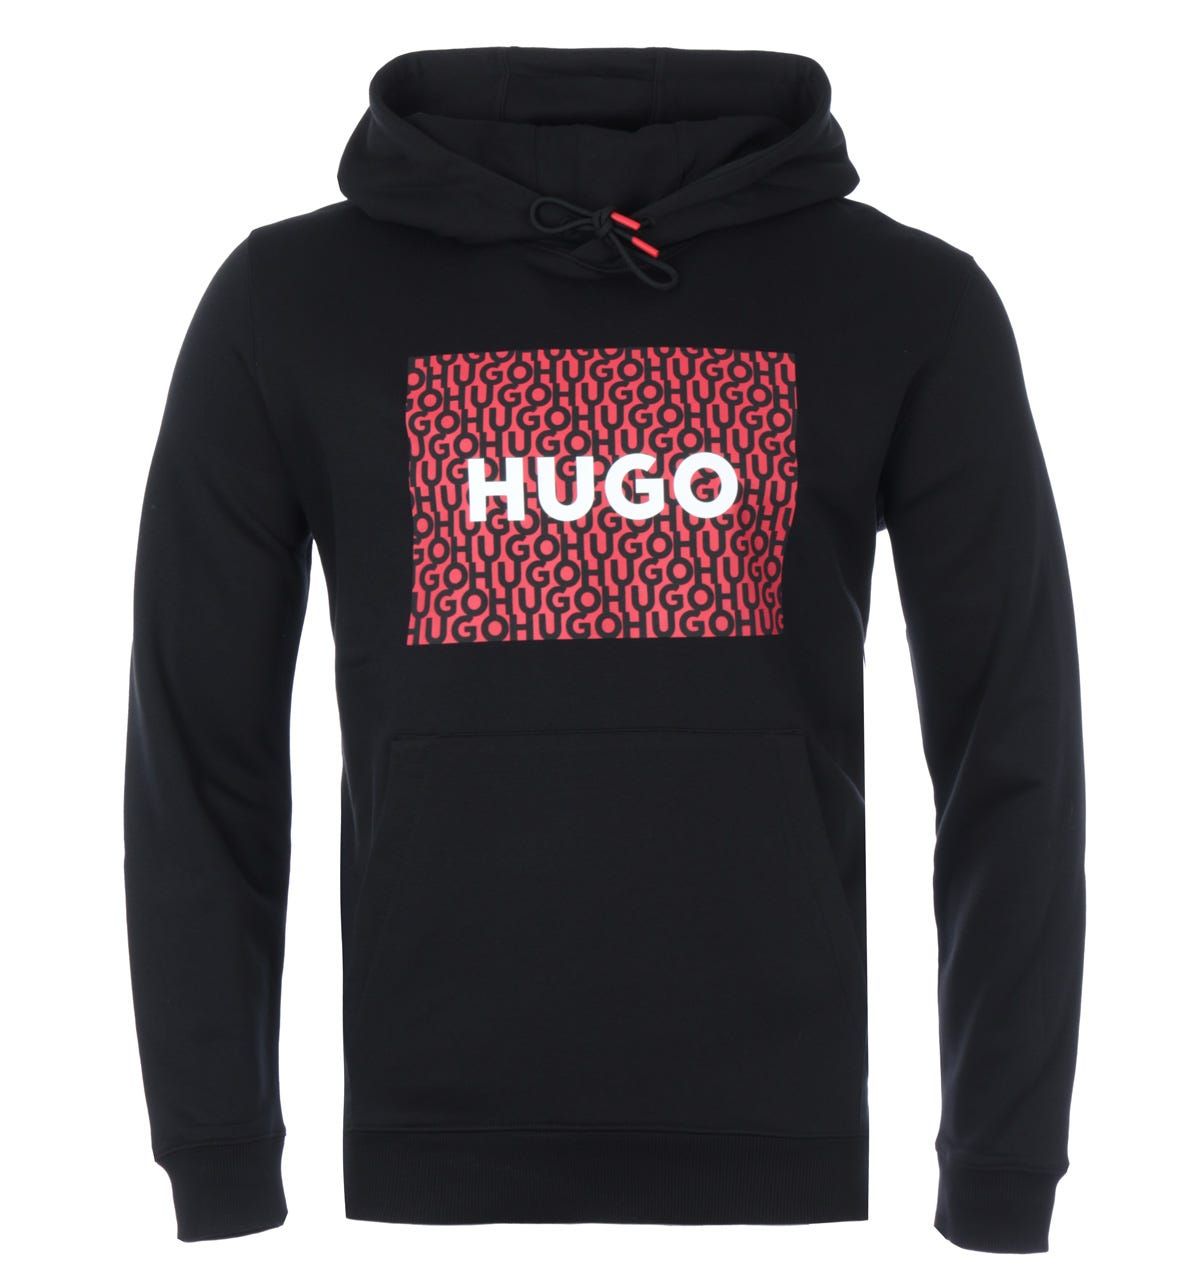 This take on a classic hooded sweatshirt by HUGO boasts a large statement logo print at the chest for signature style. Crafted from pure cotton French terry and cut to a relaxed fit for easy layering. Featuring an adjustable drawstring hood, a kangaroo pocket and ribbed trims, offering penultimate comfort and style.Relaxed Fit, Pure French Terry Cotton, Adjustable Drawstring Hood, Kangaroo Pocket, Long Sleeves, Ribbed Cuffs & Hem, HUGO Branding. Fit & Style:Relaxed Fit, Fits True to Size. Composition & Care:100% Cotton , Machine Wash.